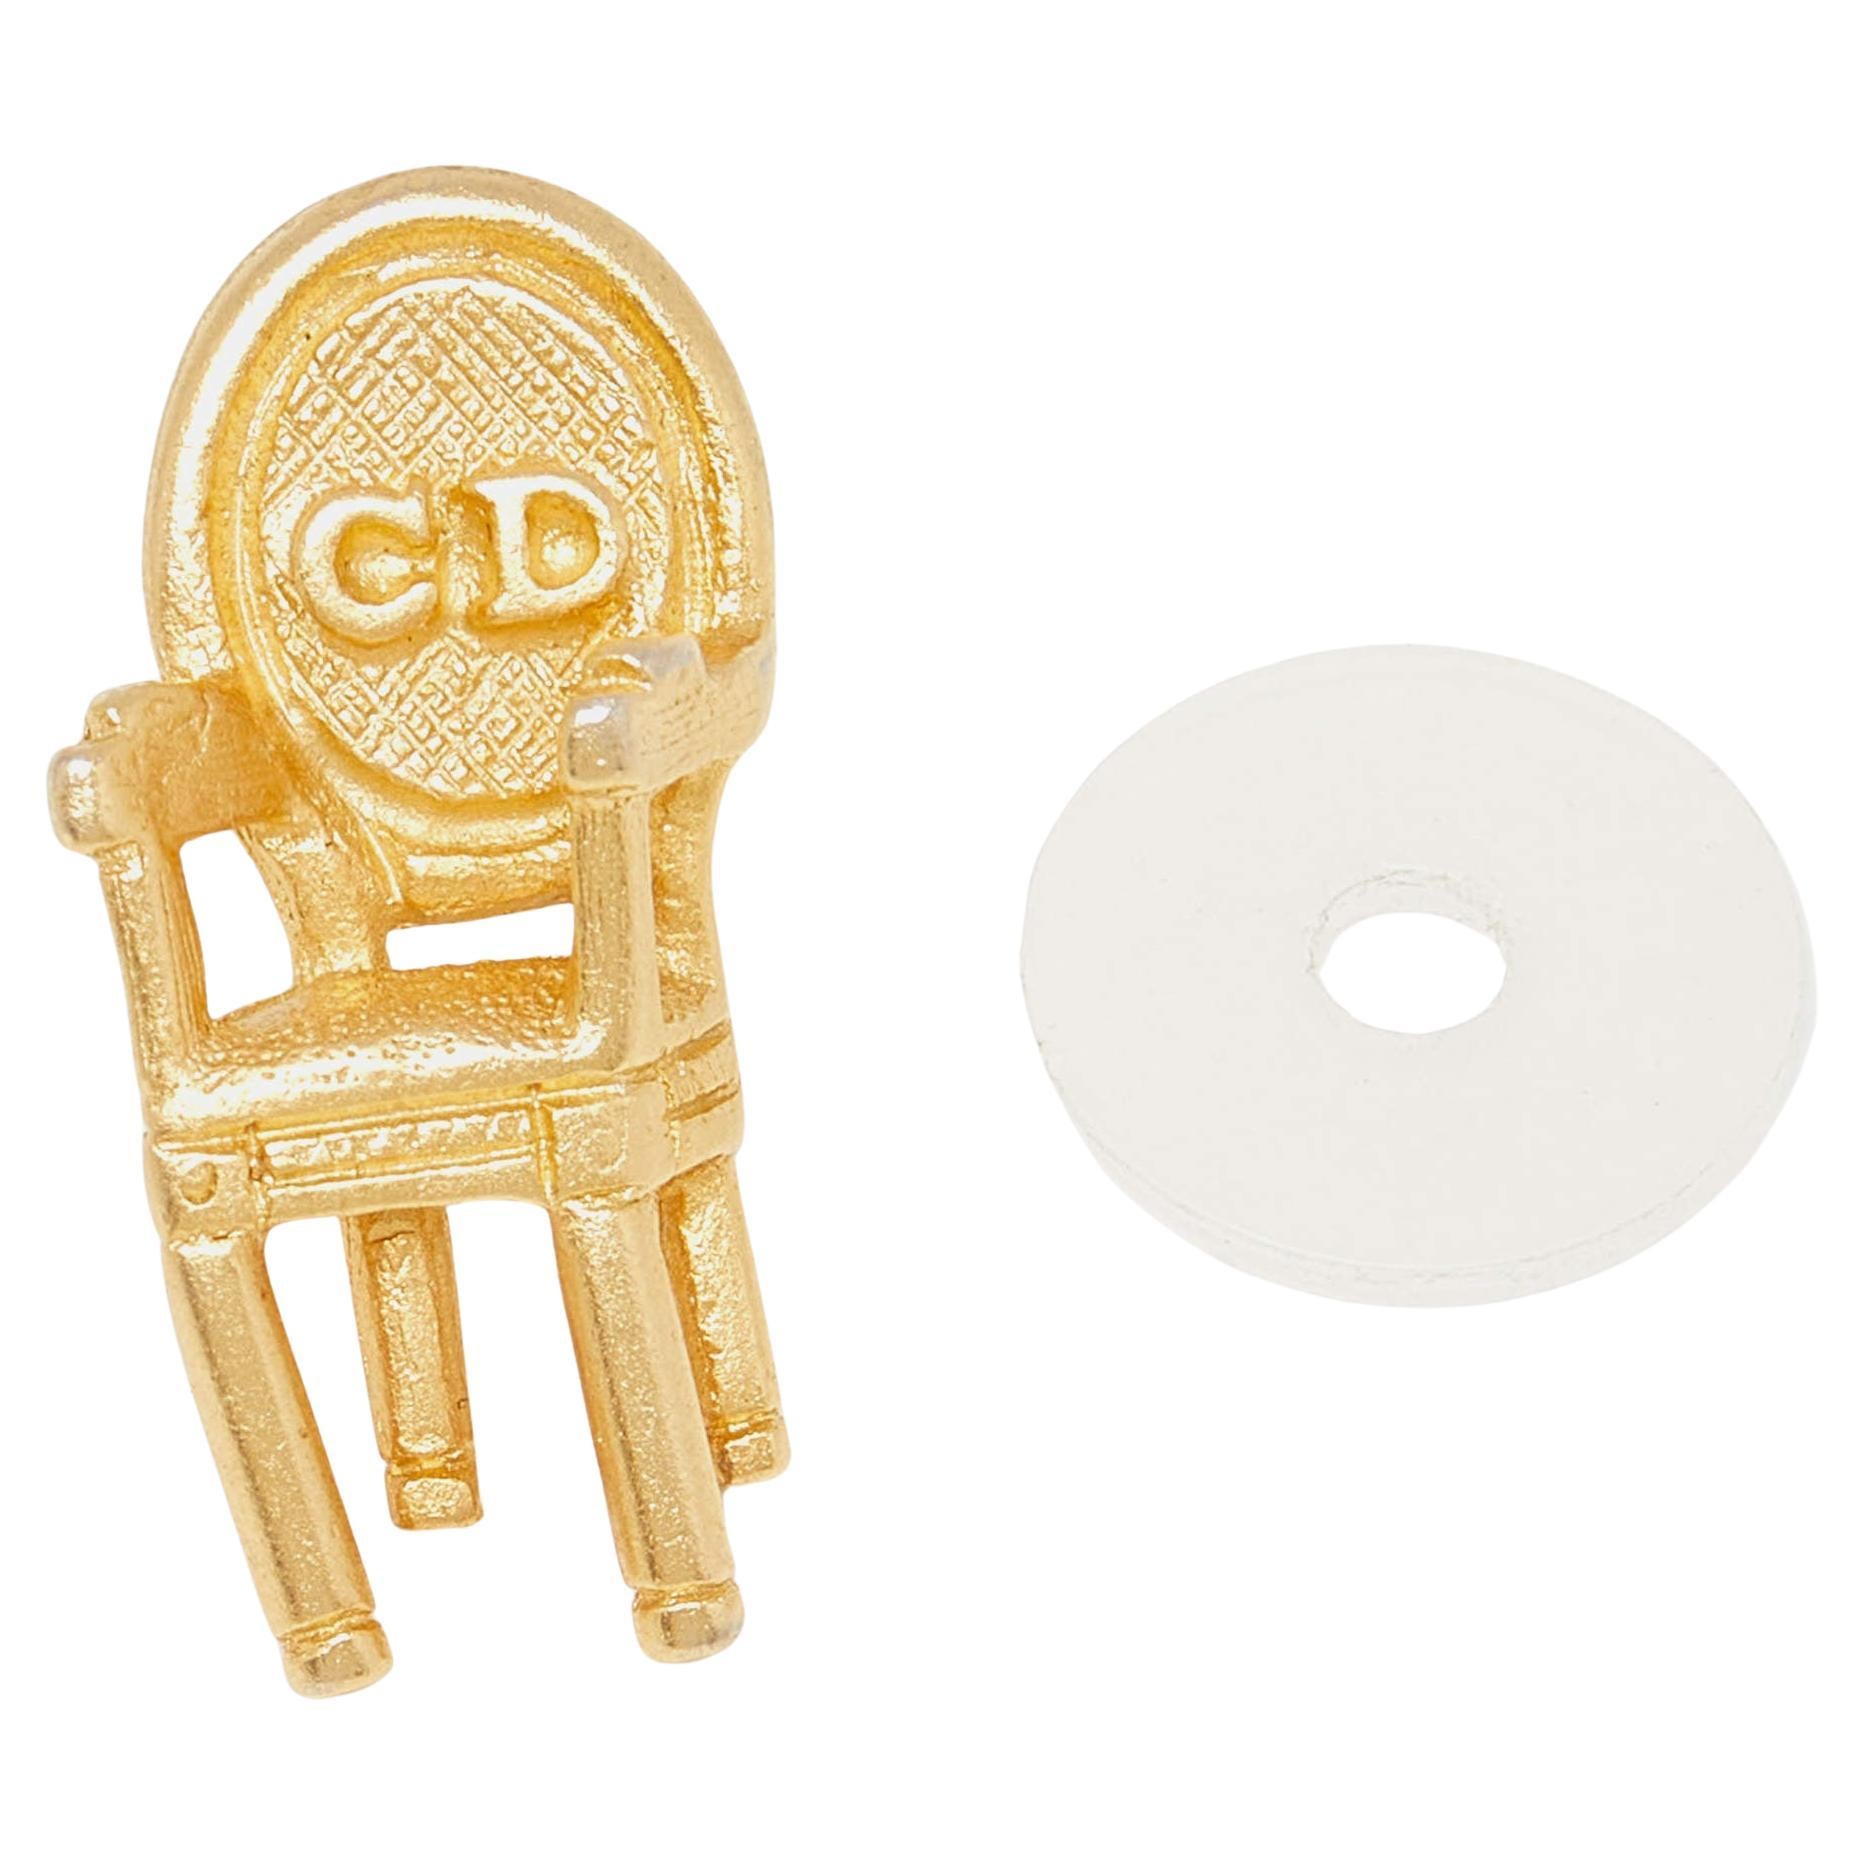 Christian Dior Vintage Gold Plated CD Chair Pin Brooch